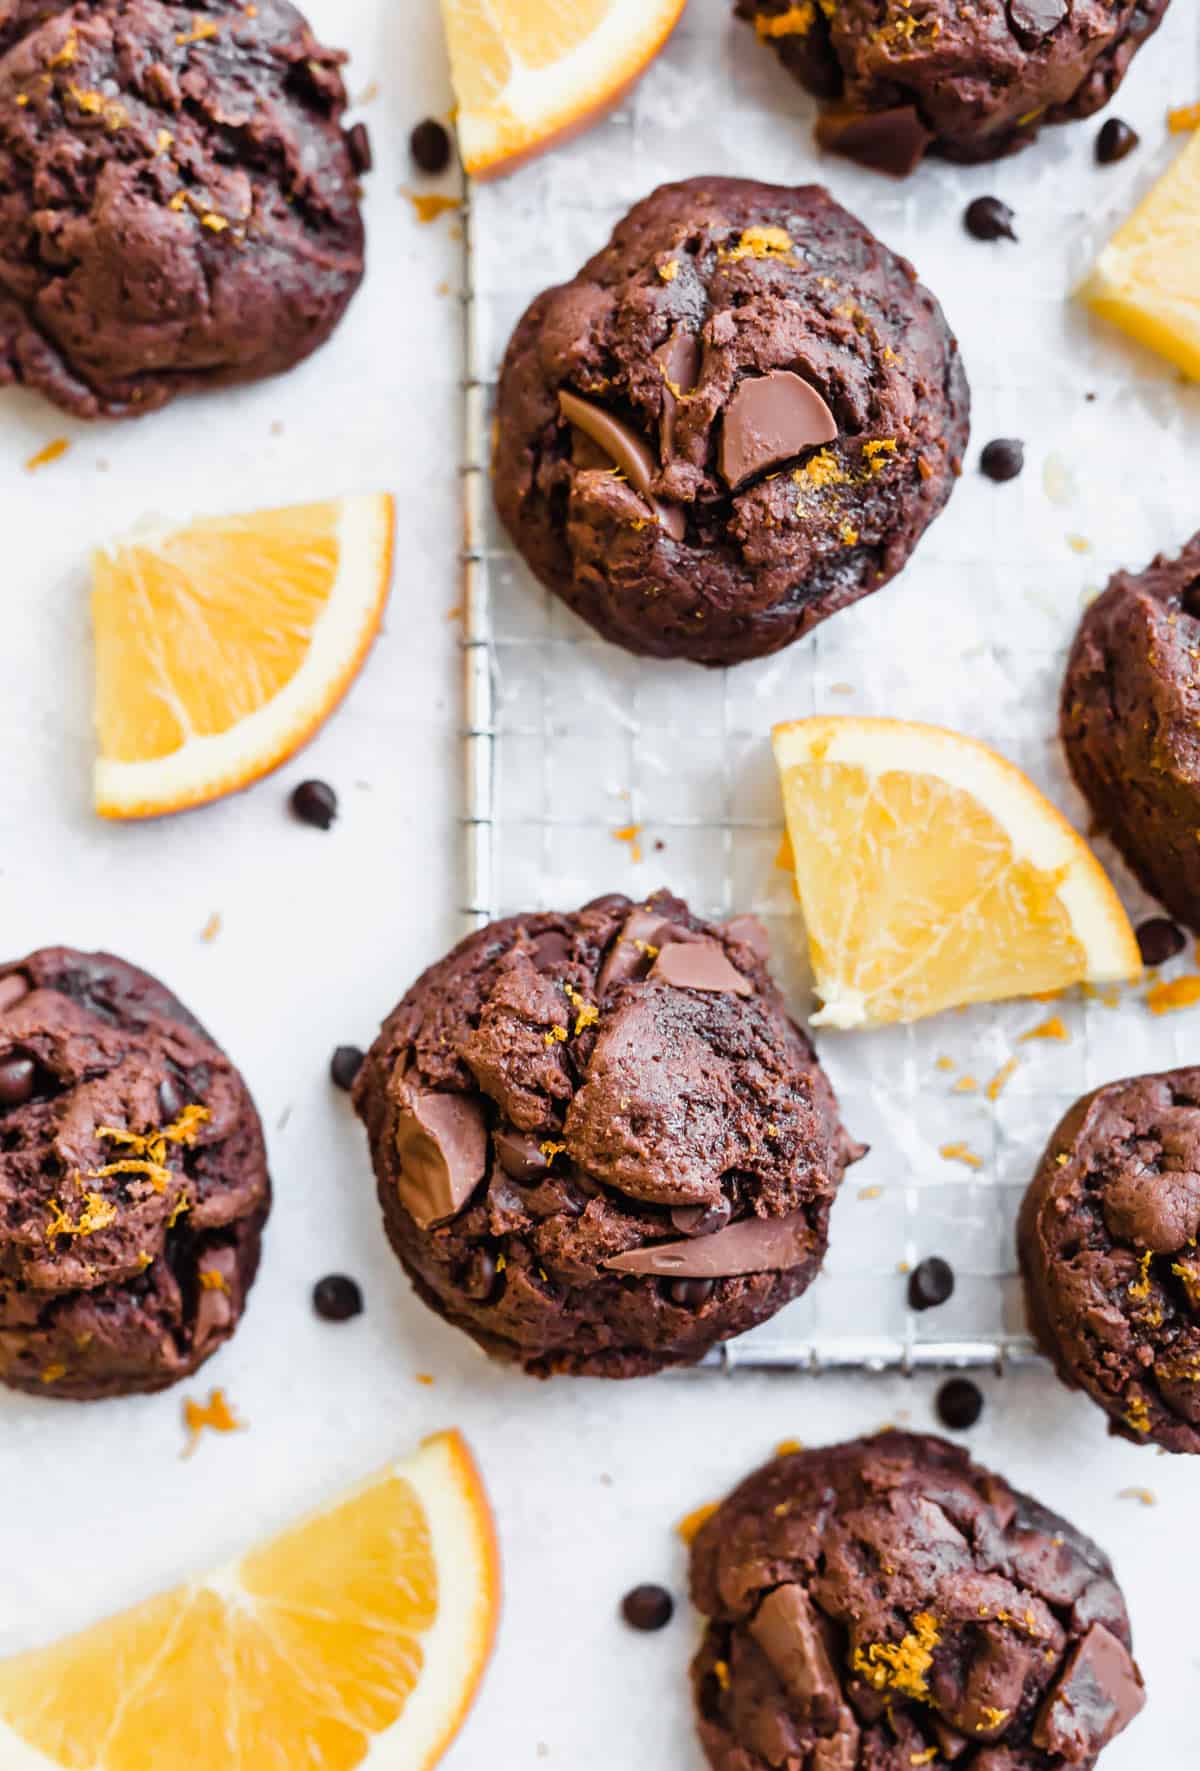 Chocolate Orange Cookies on a white background surrounded by sliced oranges.